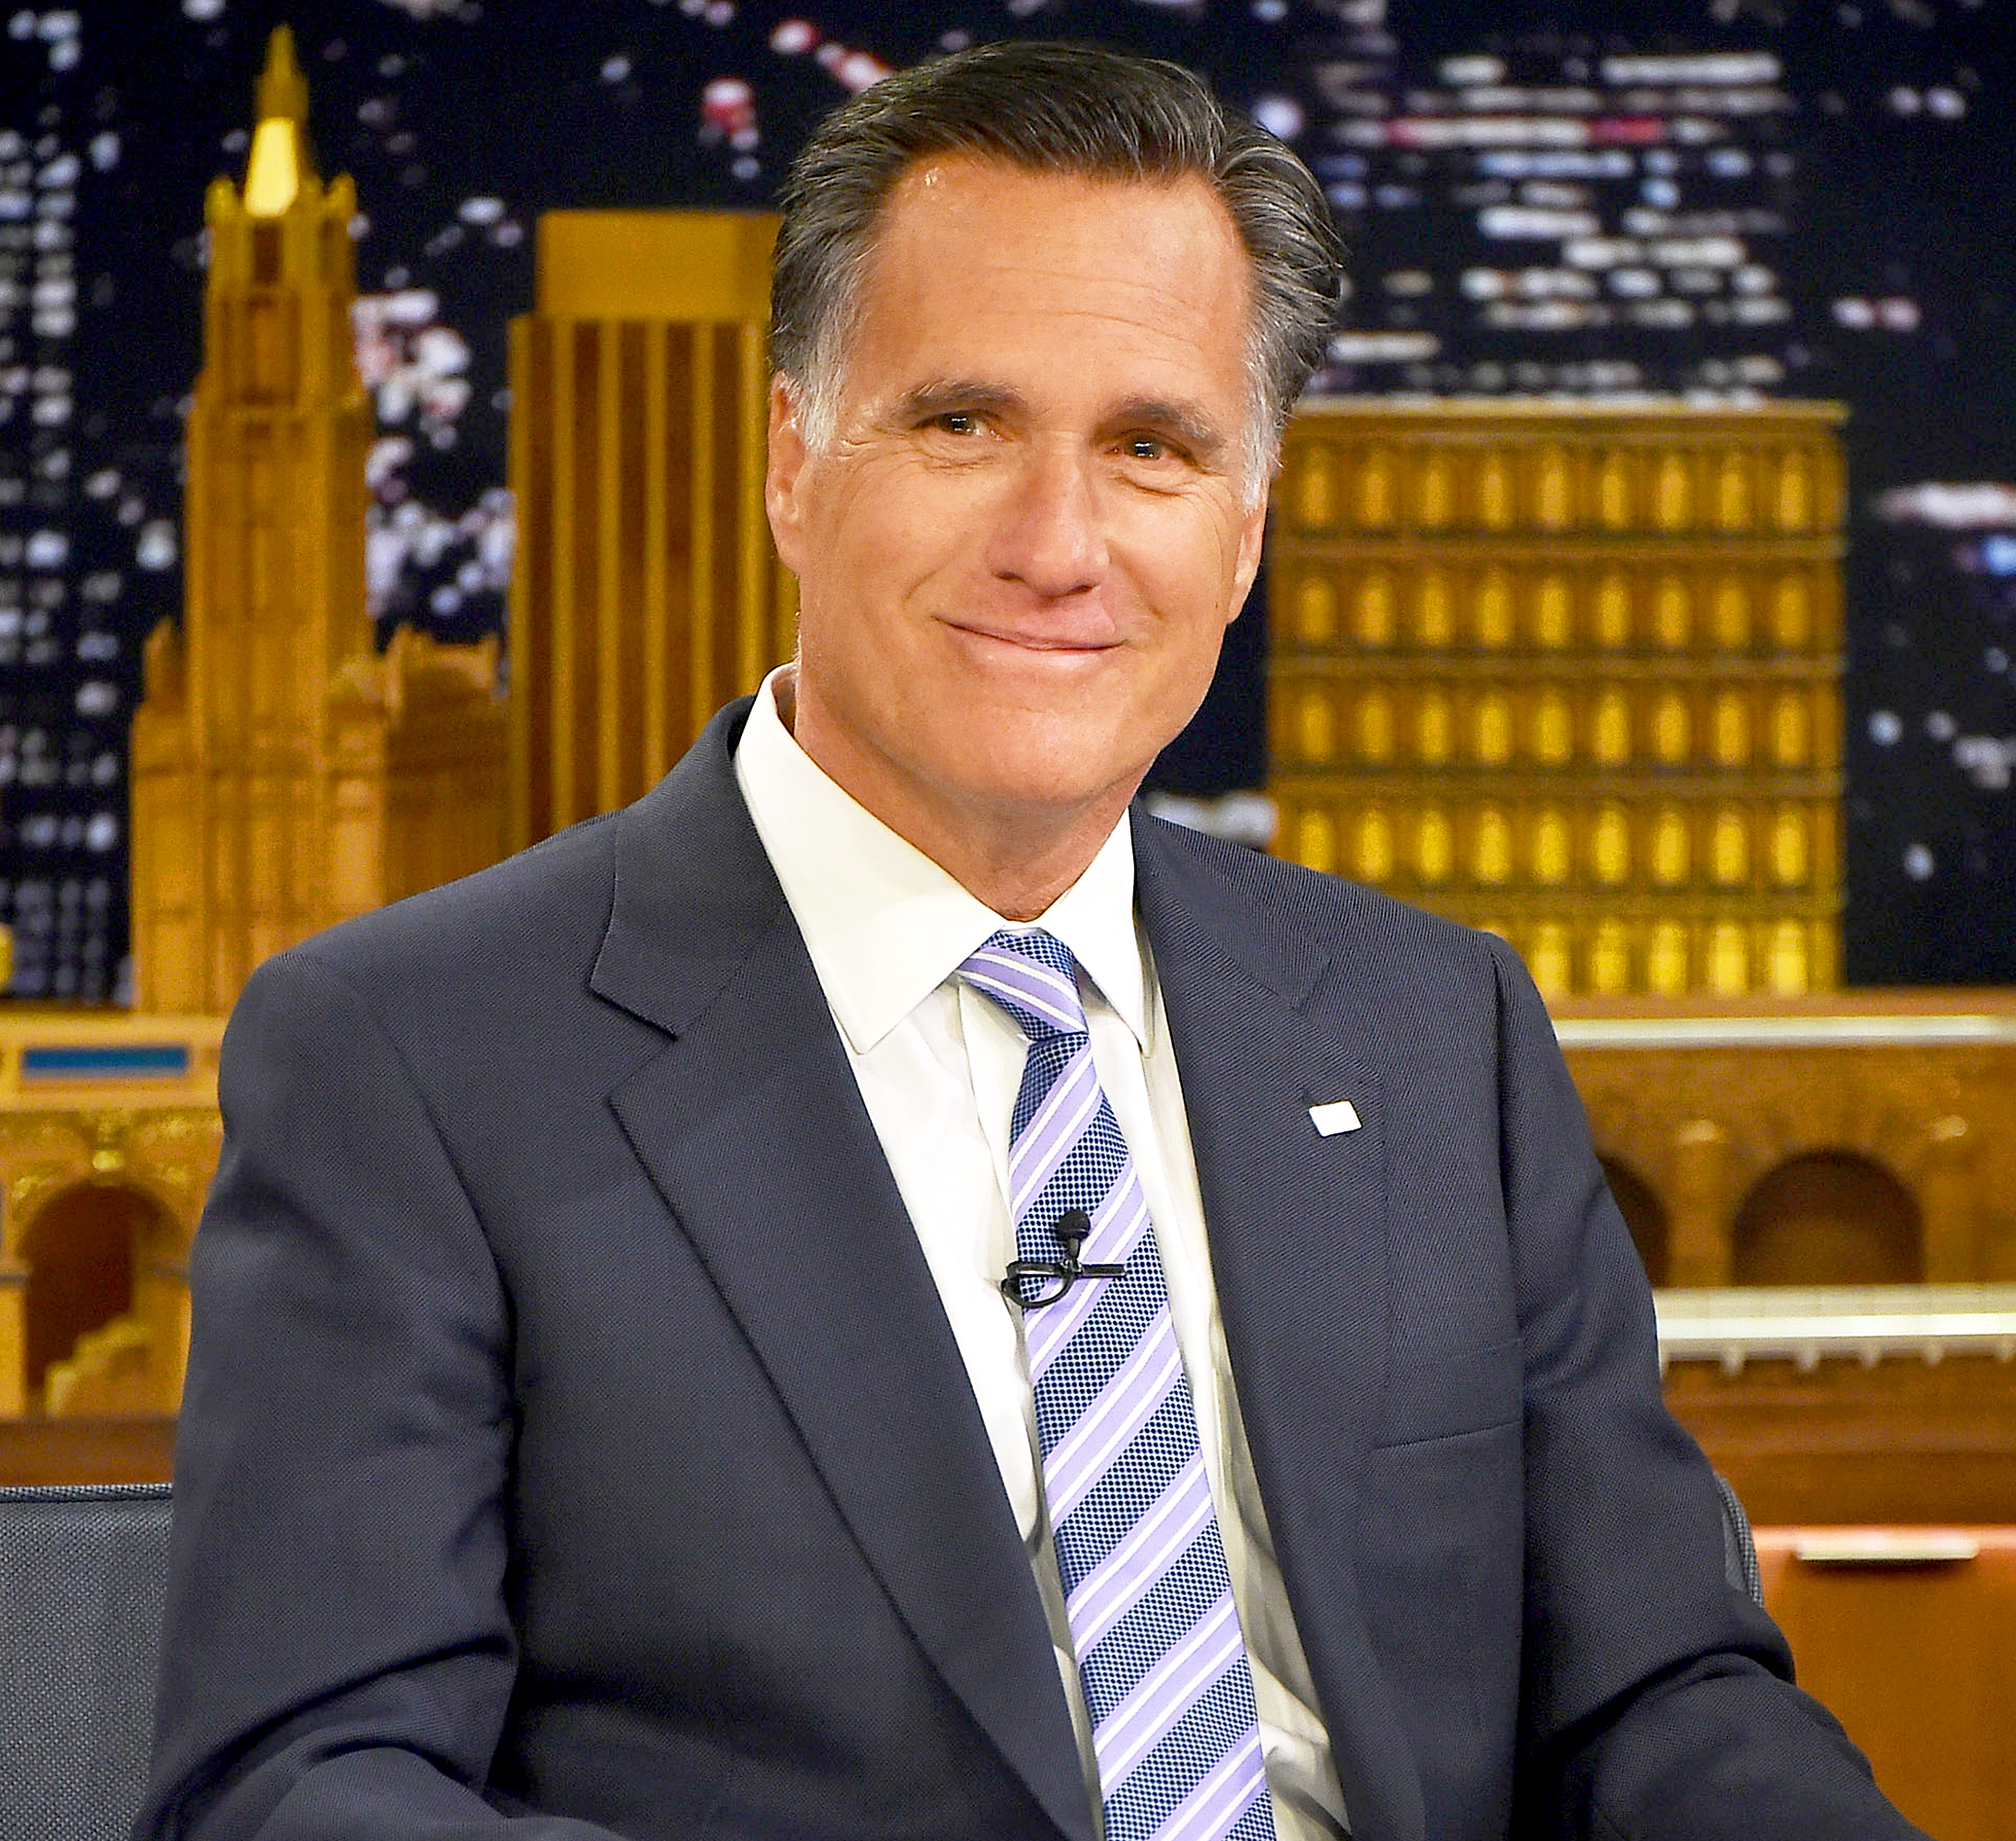 Mitt Romney Treated for Prostate Cancer Last Year